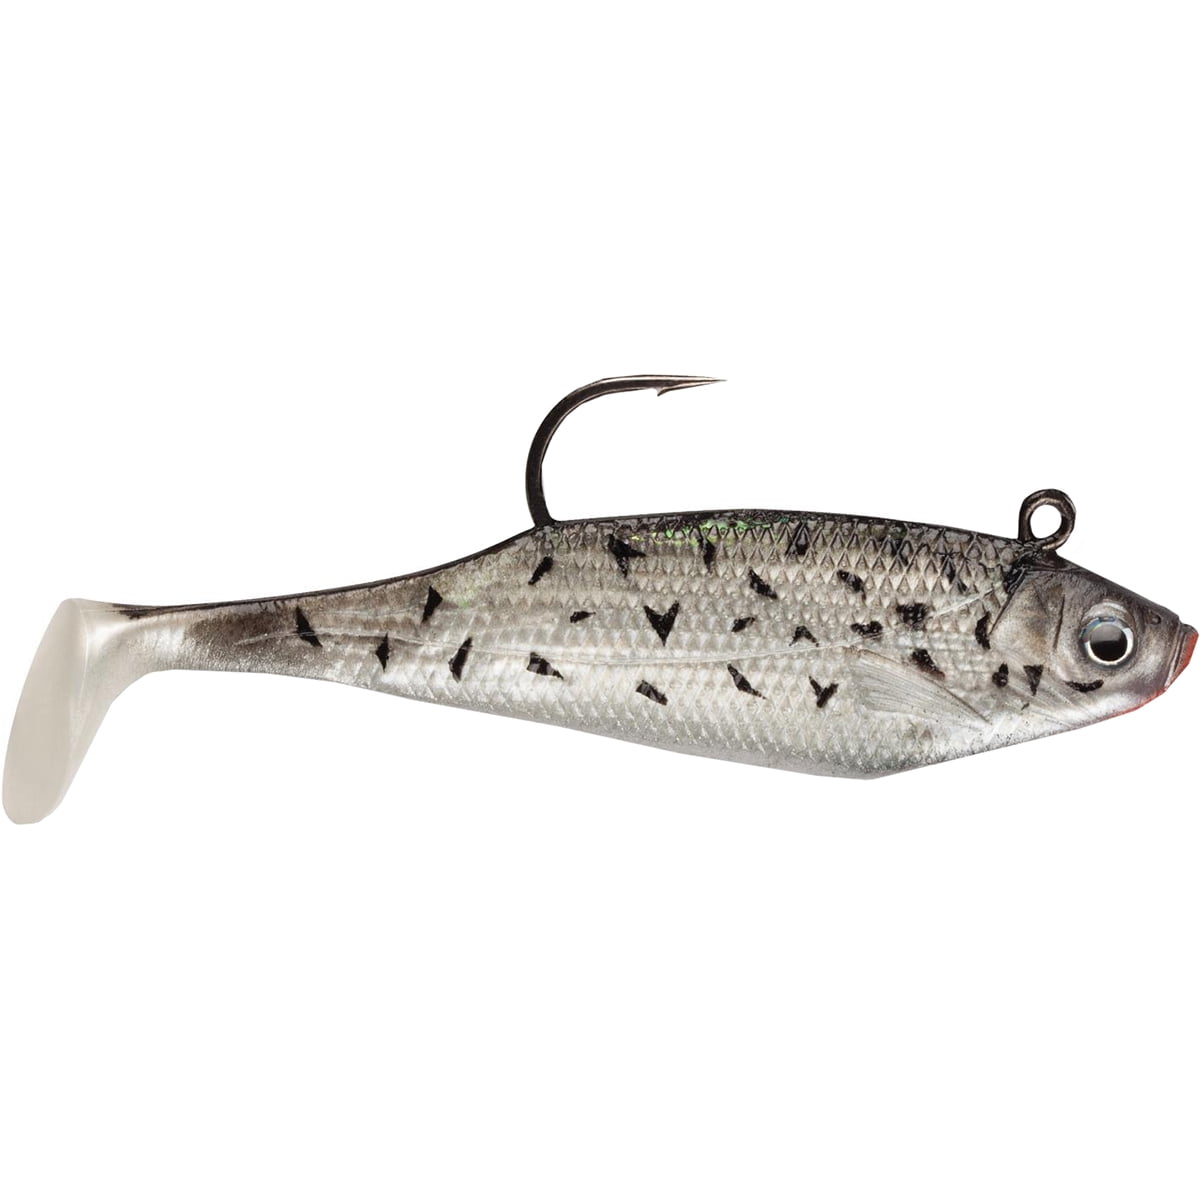 Storm WildEye Live Crappie Fishing Lures 3-Pack 